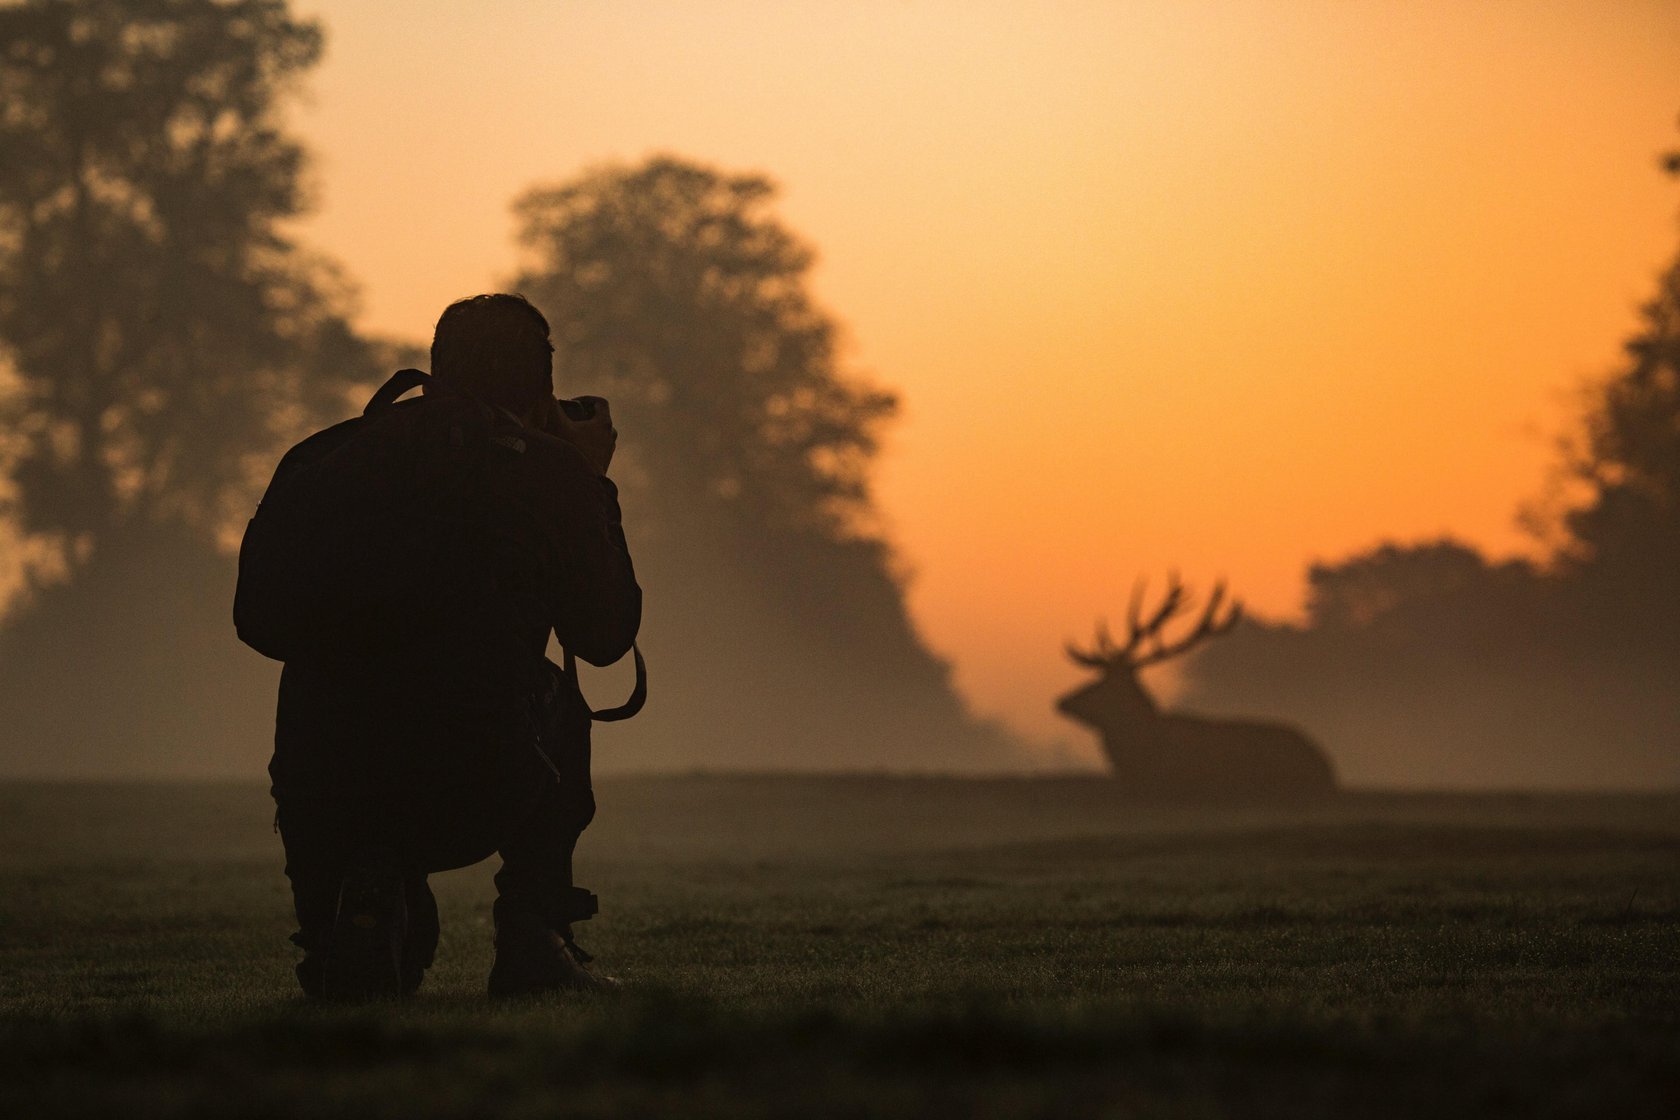 Silhouette Photography: The Art of Capturing Cool Silhouettes | Skylum Blog(15)